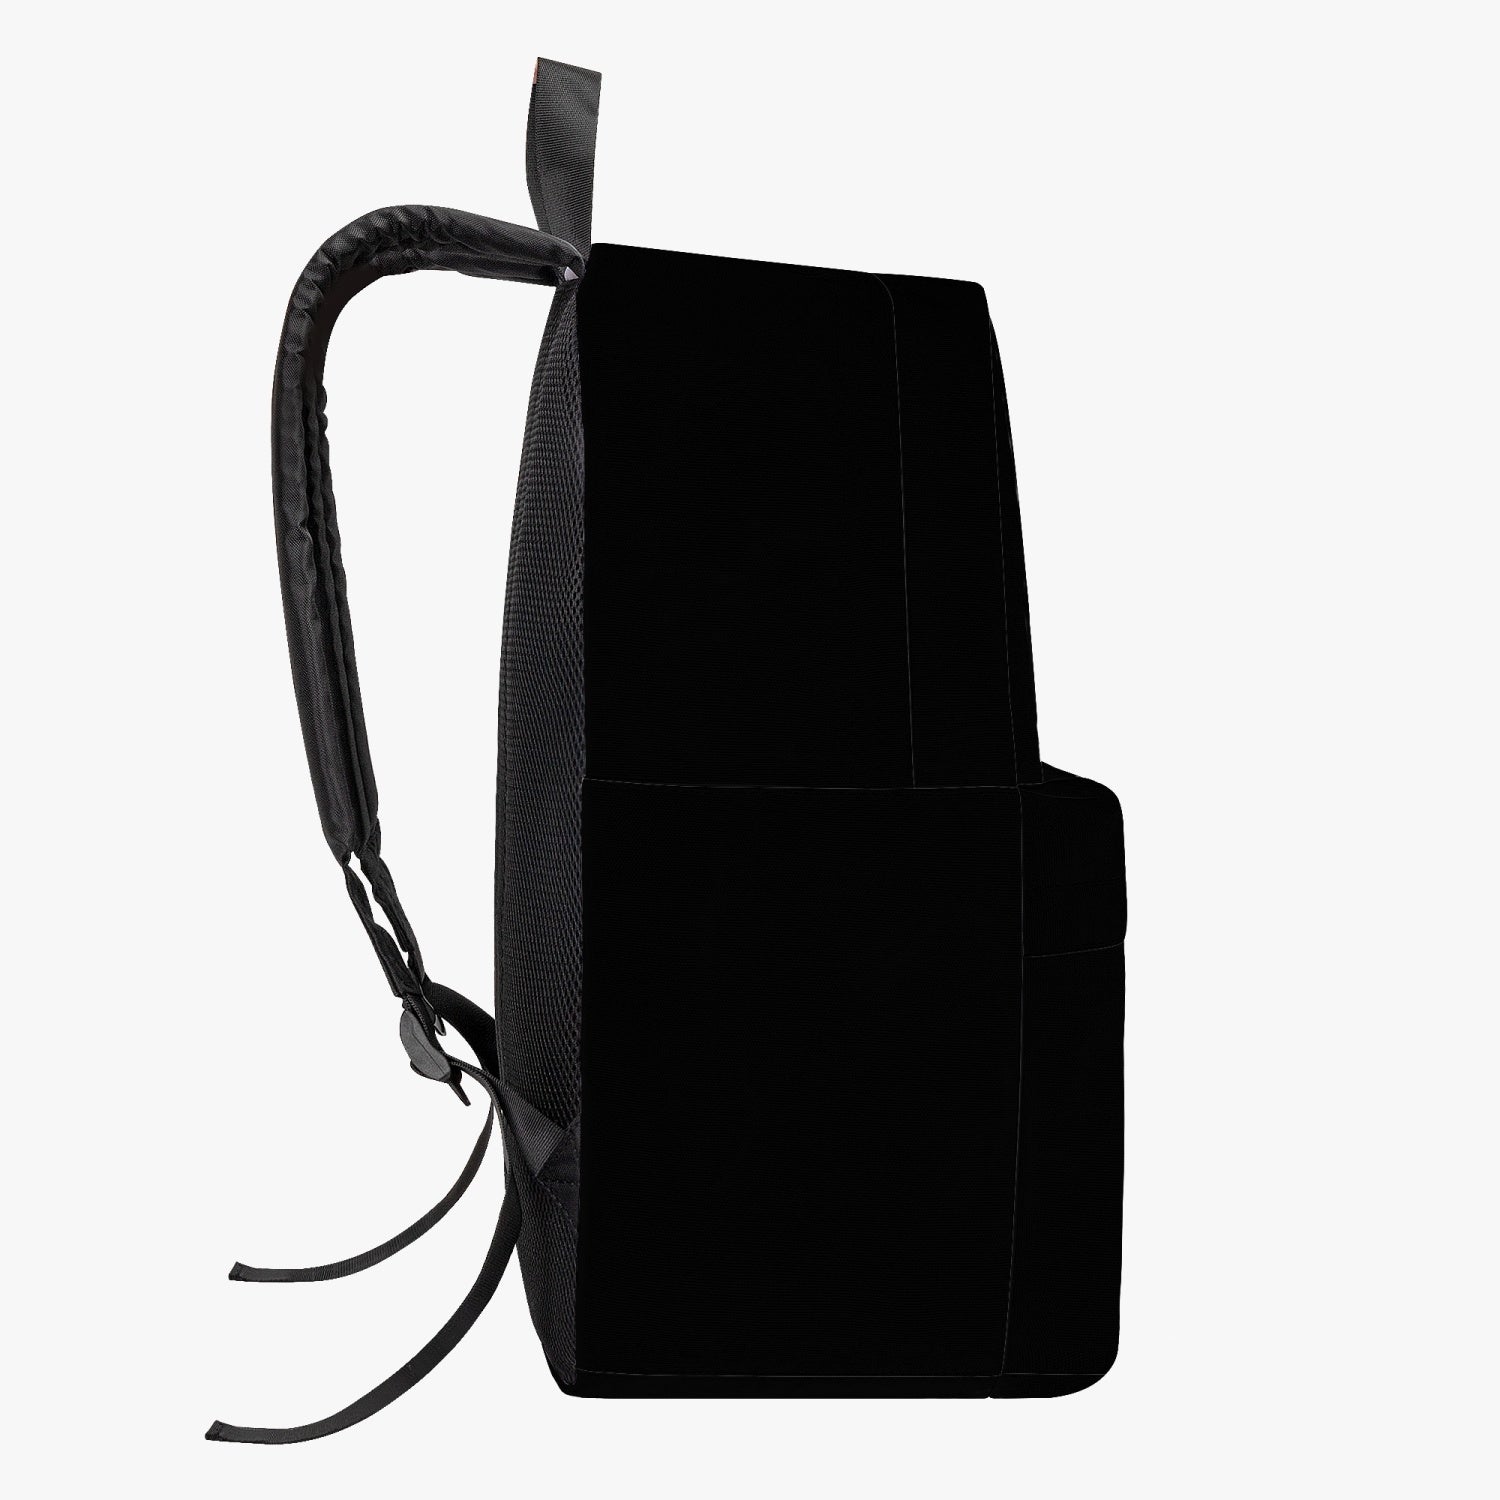 TechSoup Black Canvas Backpack